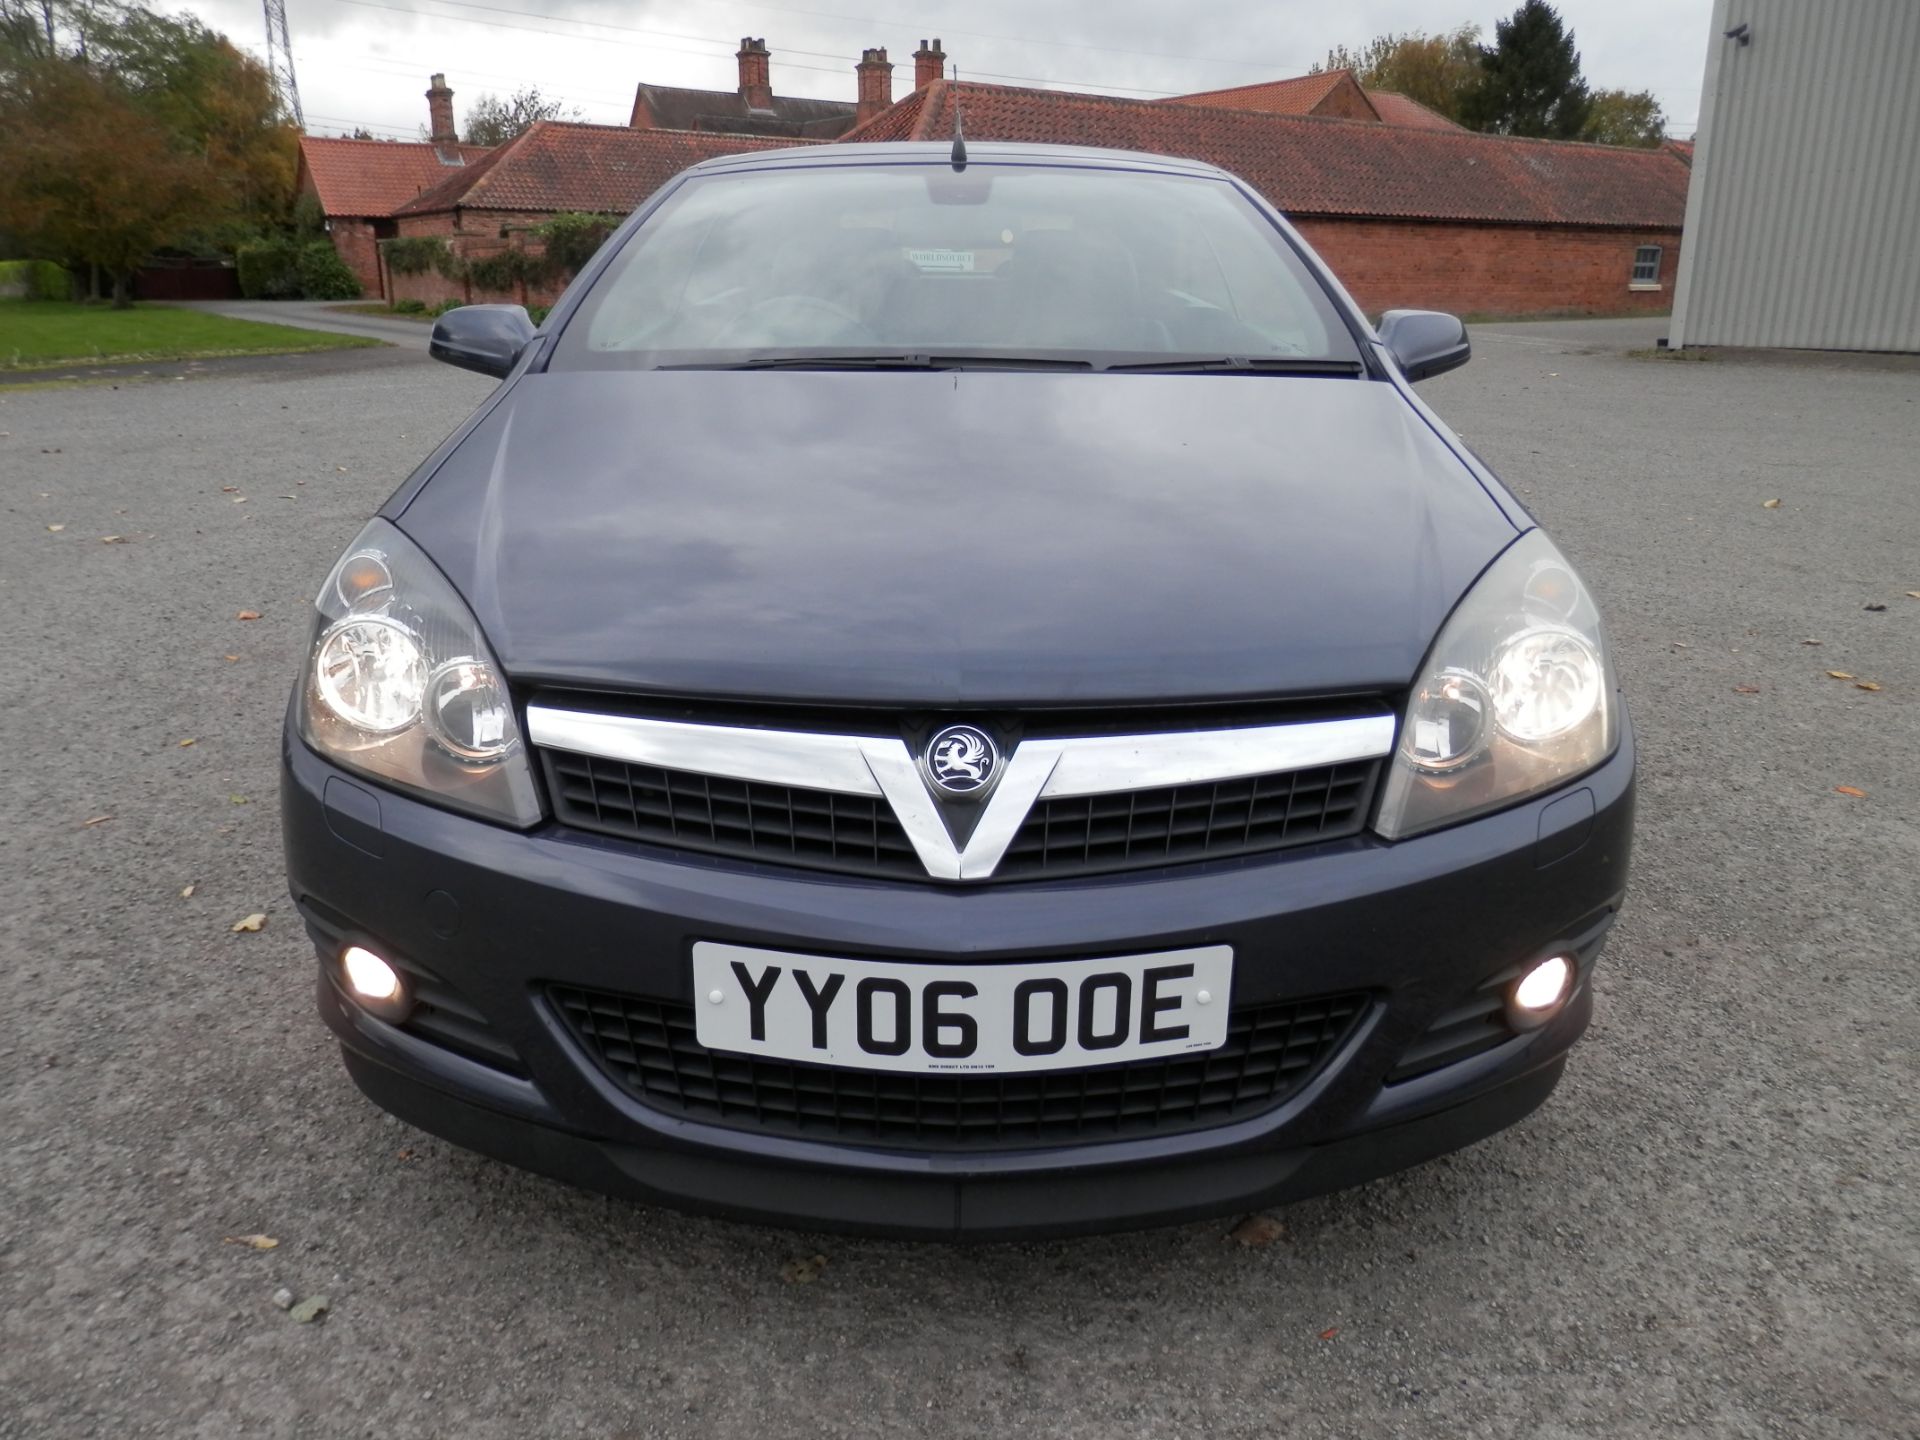 2006/06 VAUXHALL ASTRA DESIGN 1.8 SPORT TWIN TOP CONVERTIBLE, ONLY 62K MILES WARRANTED, MOT FEB 2017 - Image 5 of 24